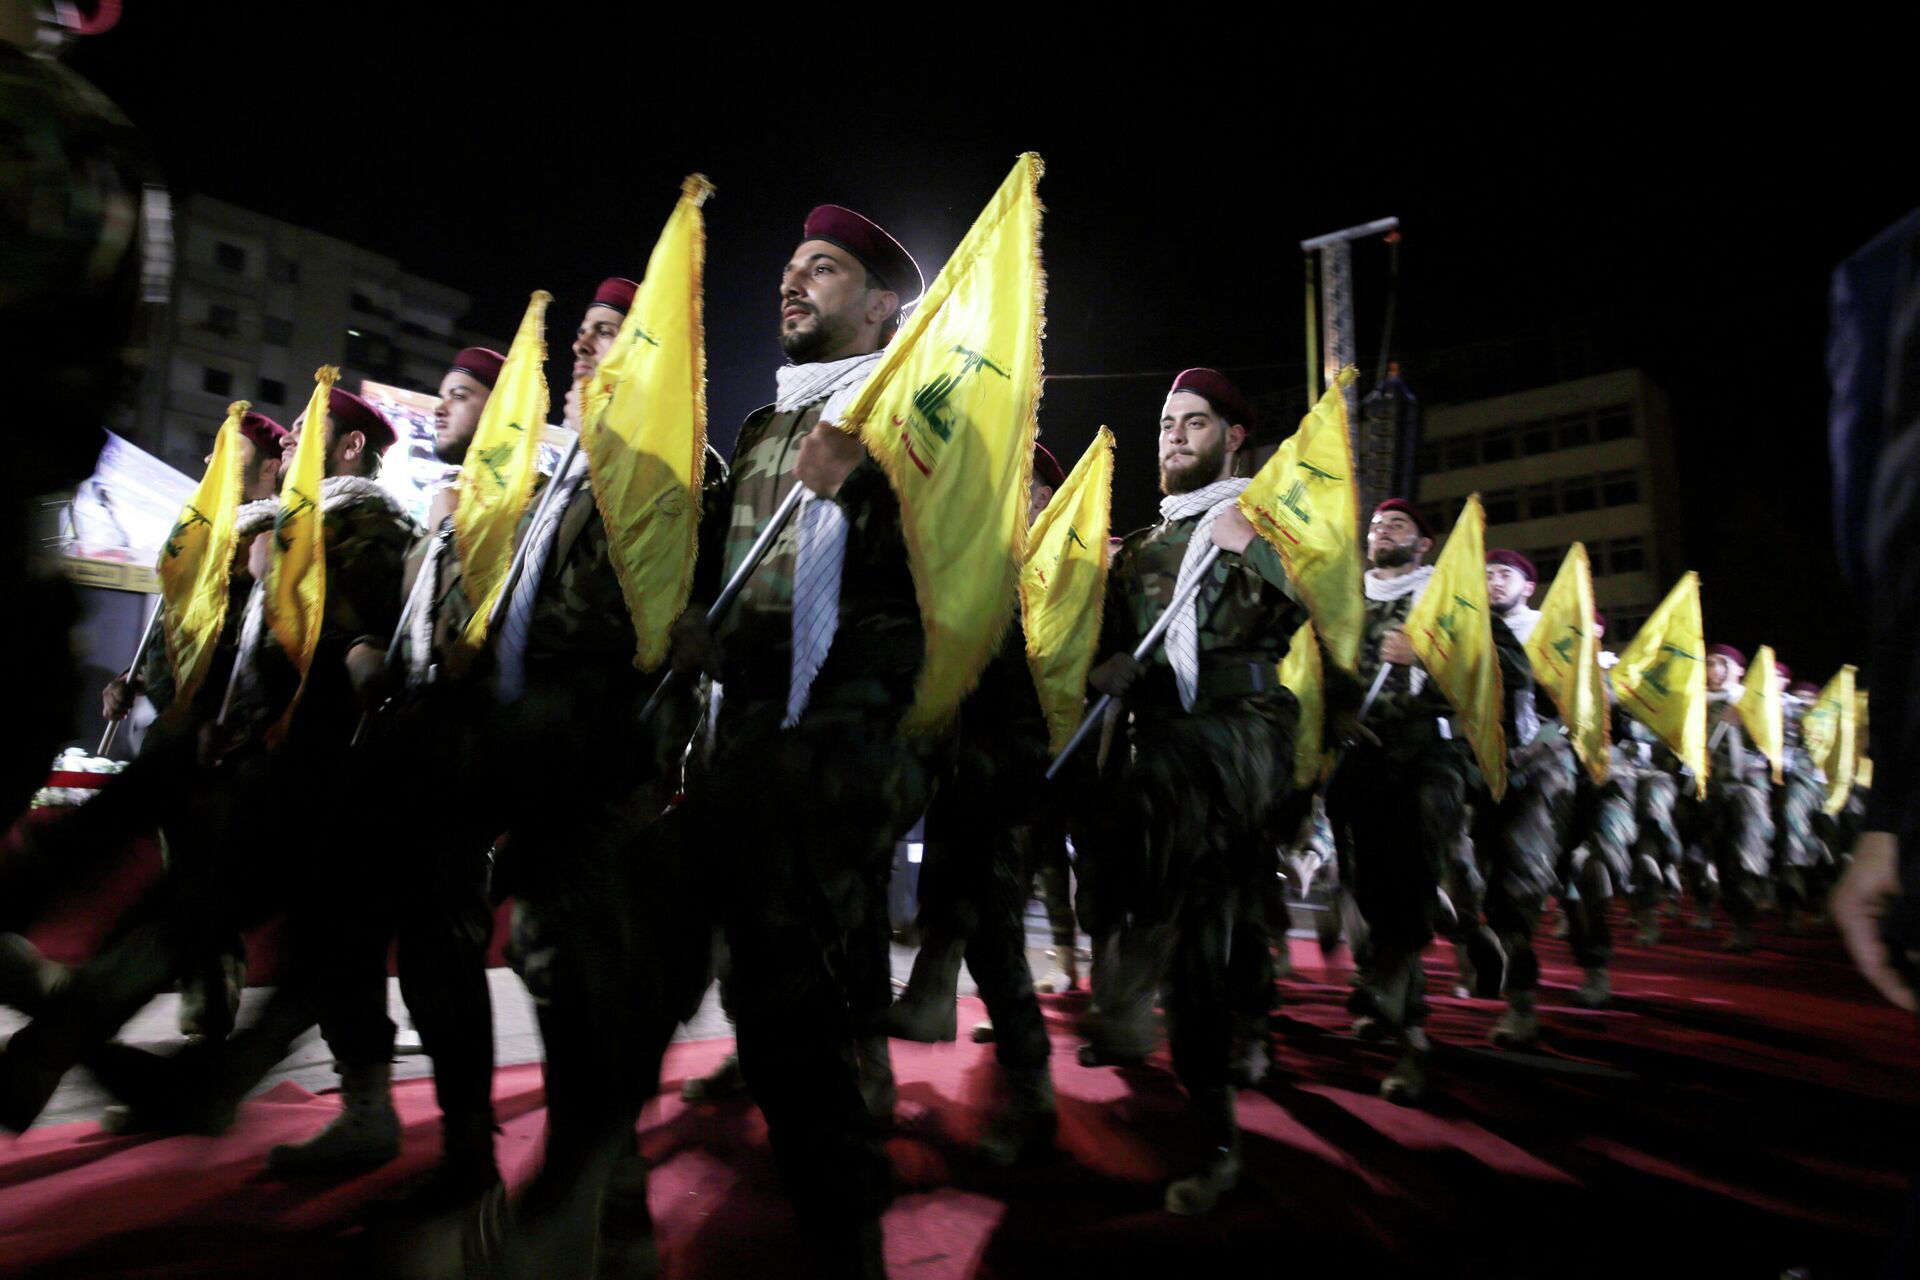  In this May 31, 2019 file photo, Hezbollah fighters march at a rally to mark Jerusalem day or Al-Quds day, in the southern Beirut suburb of Dahiyeh, Lebanon. On Monday, Oct. 18, 2021, Hezbollah leader Sheik Hassan Nasrallah revealed that his militant group has 100,000 trained fighters. - Sputnik International, 1920, 13.05.2022